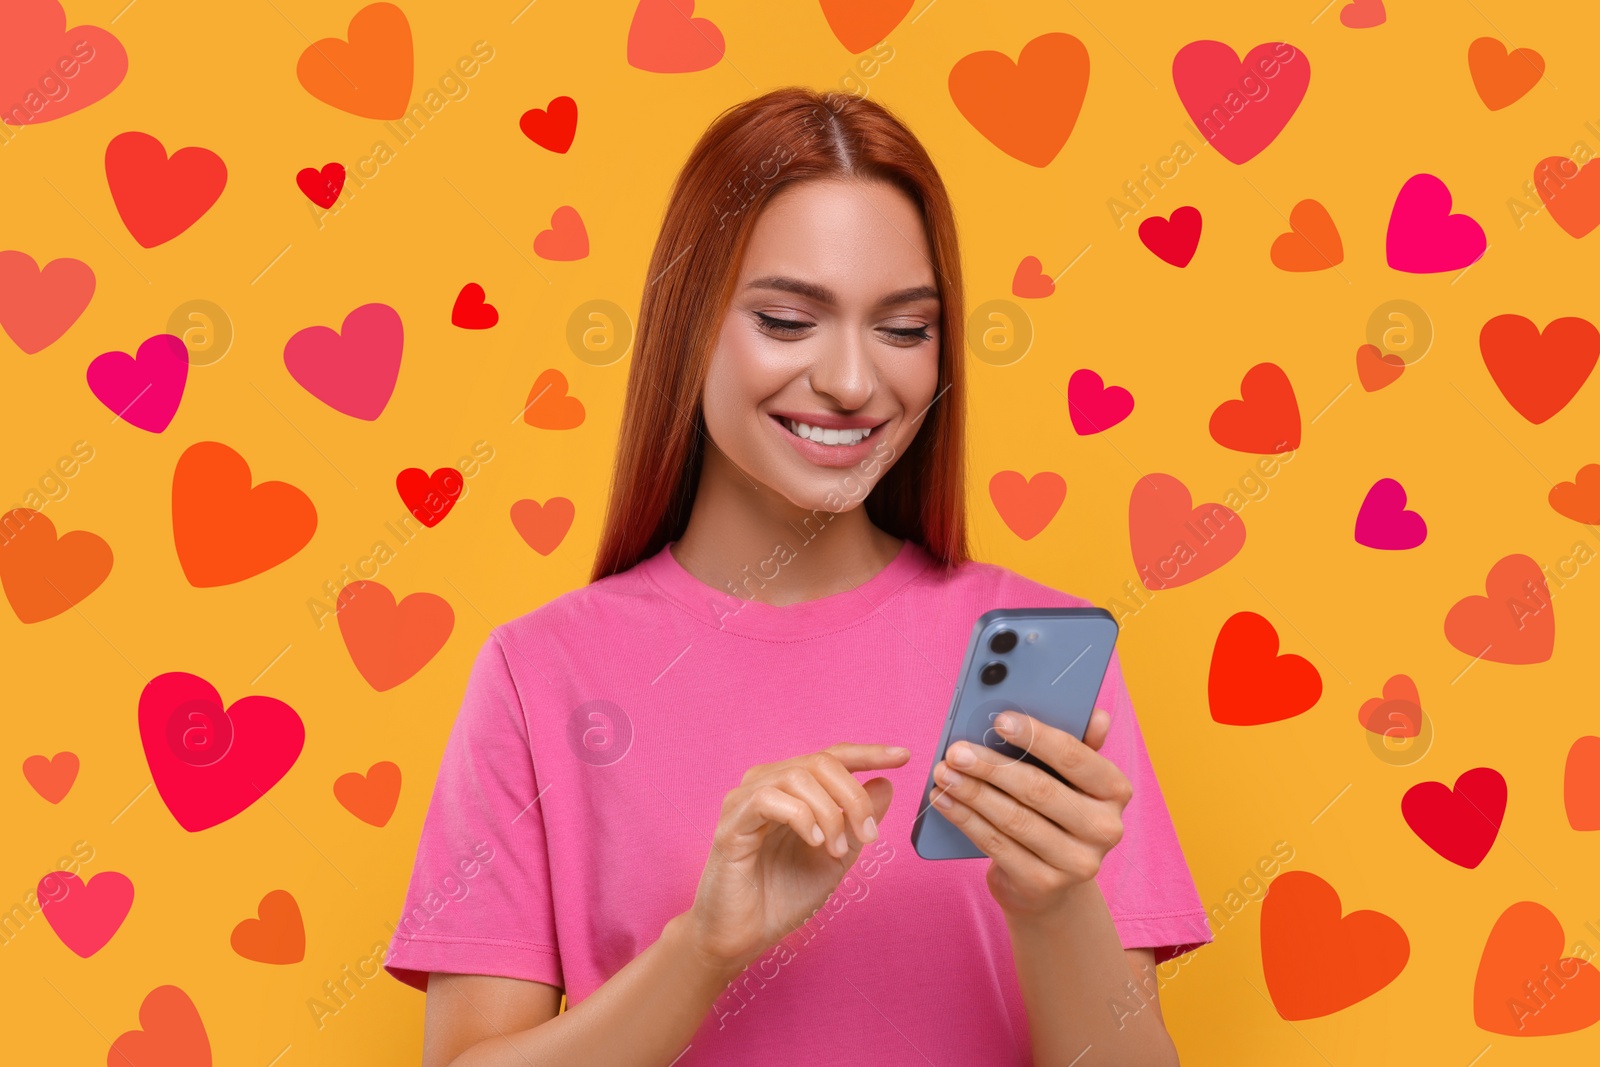 Image of Long distance love. Woman chatting with sweetheart via smartphone on golden background. Hearts around her